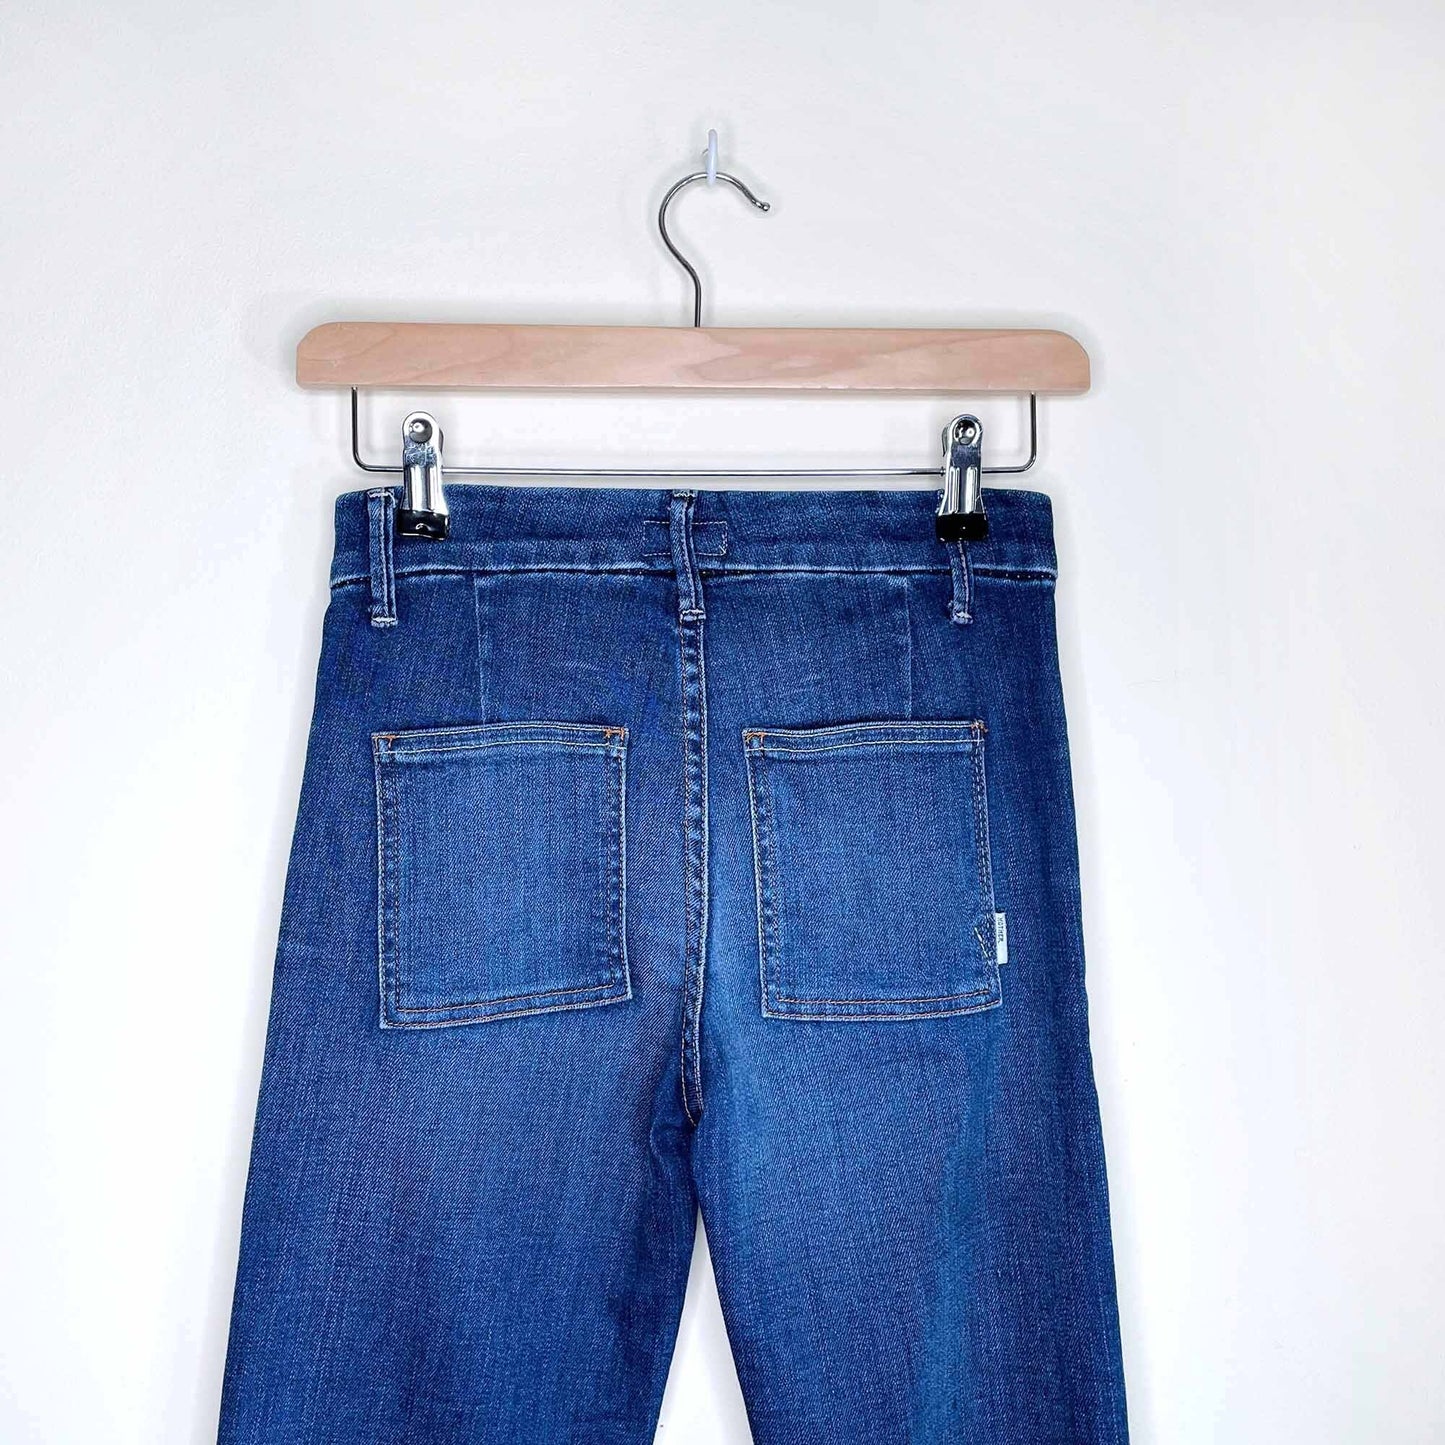 mother the drama 'cry of a peacock' wide leg jeans - size 25